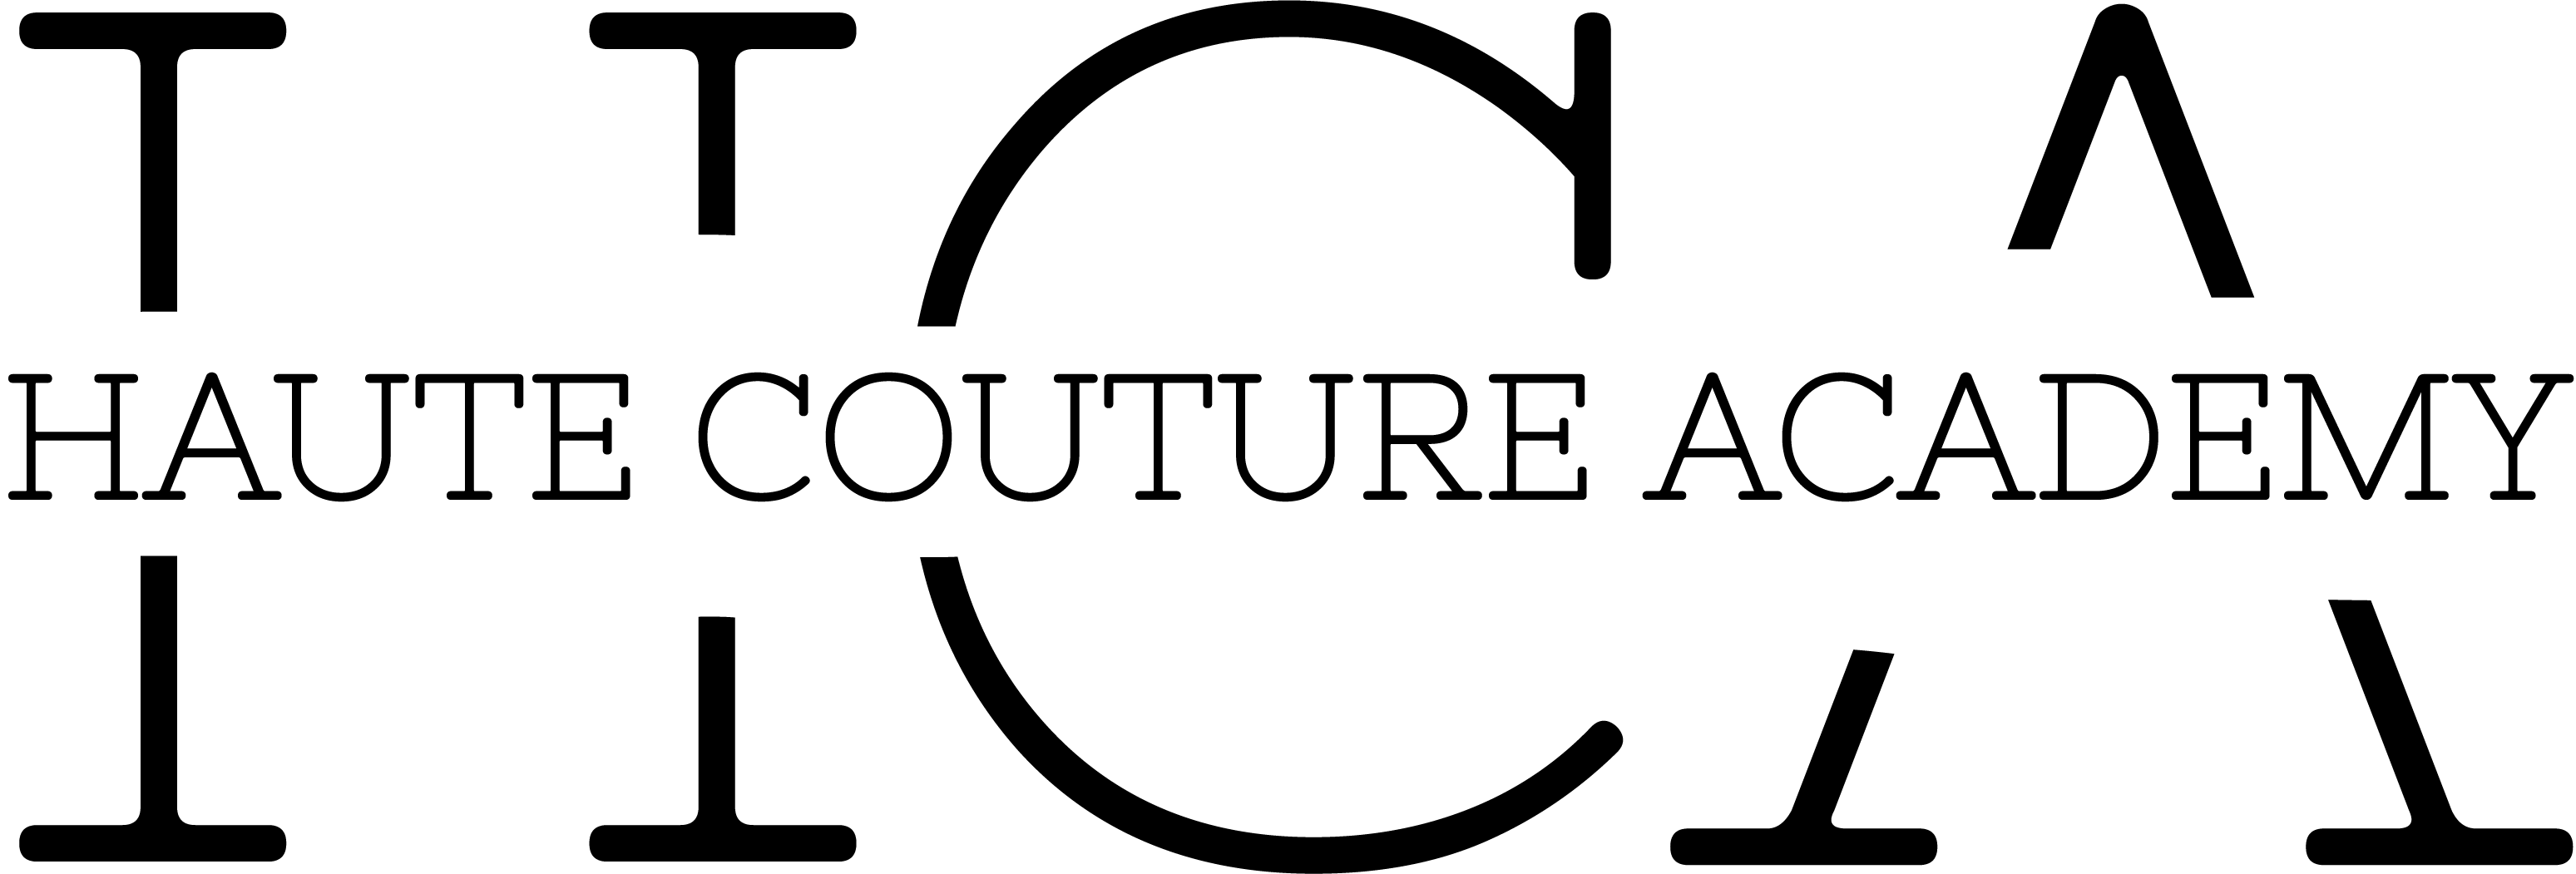 Haute Couture Academy